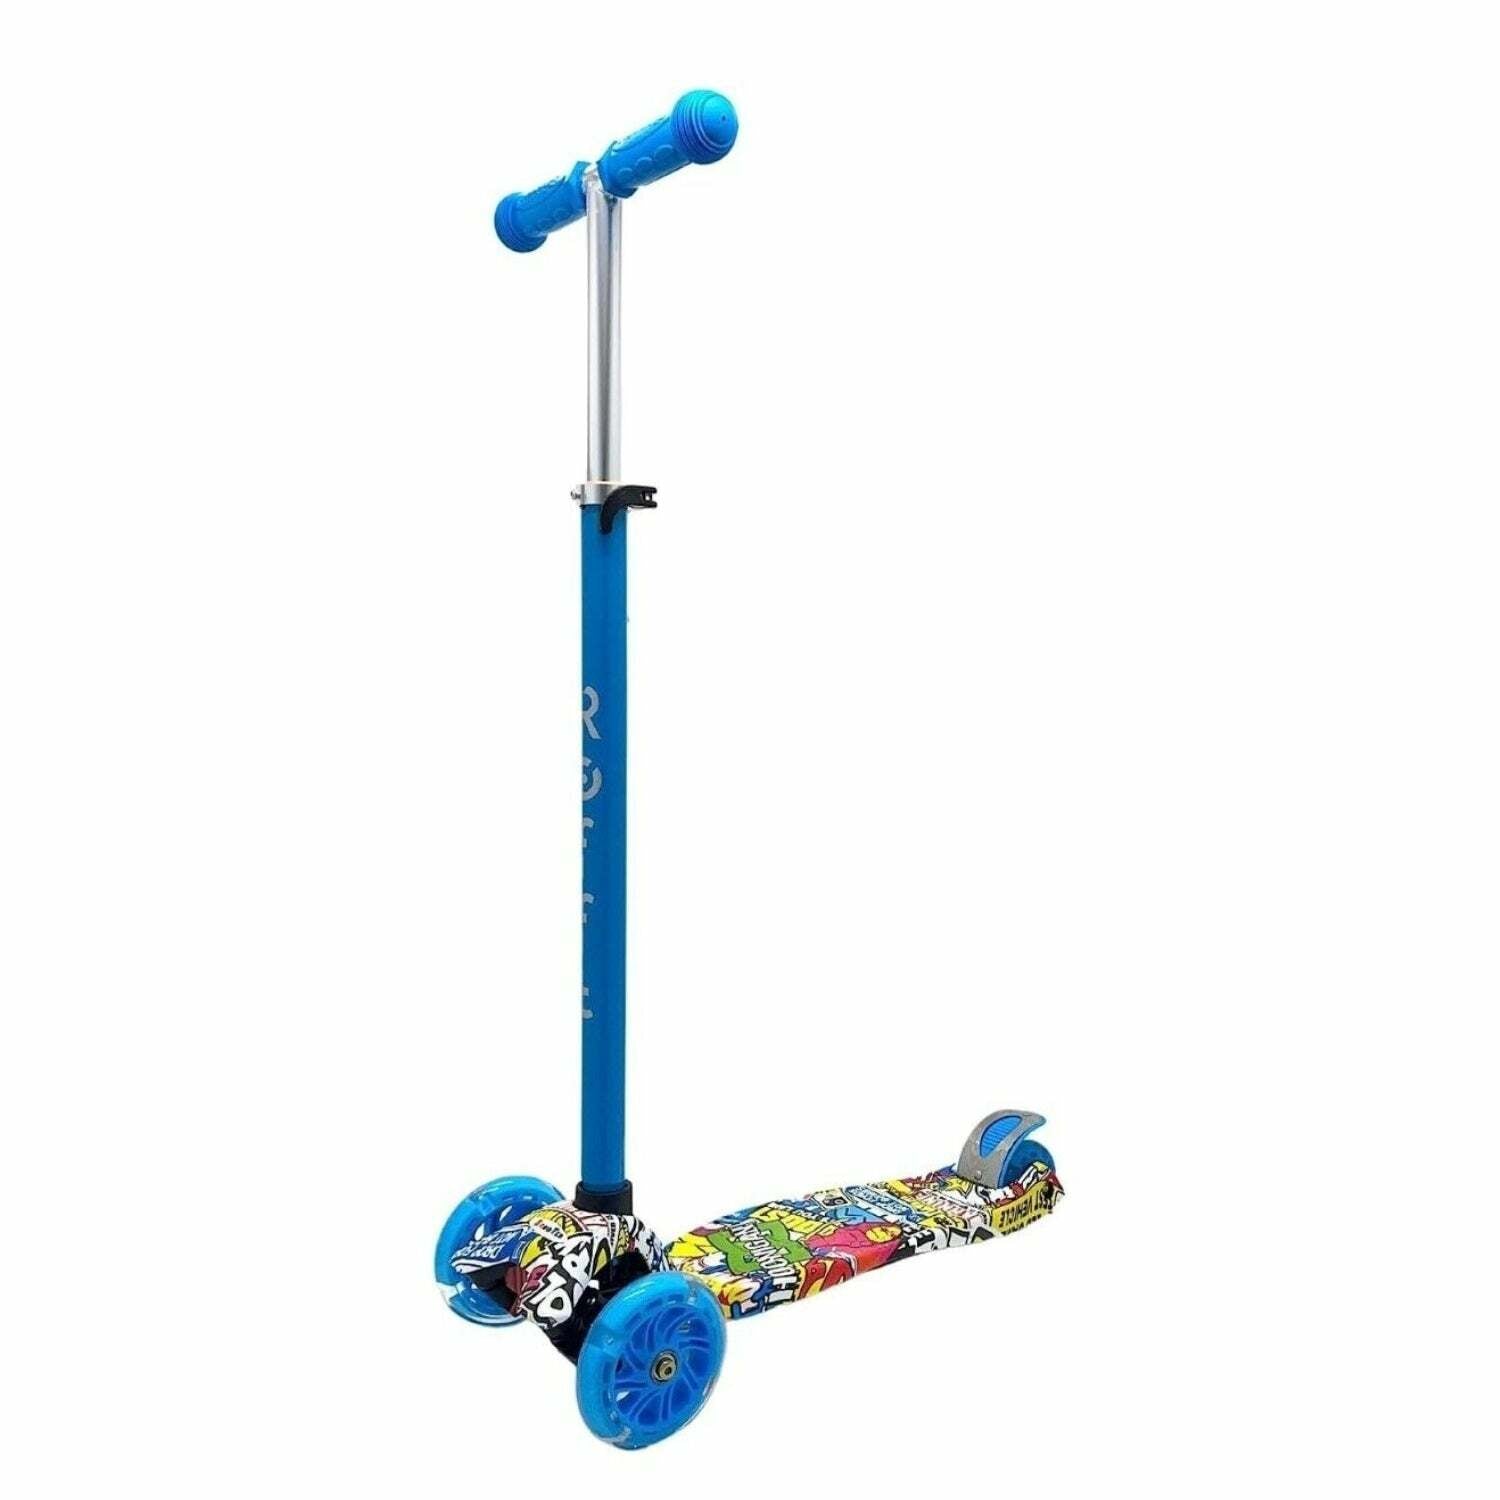 ROFFT - Kick Scooter Maxi, 3 Wheel, Lean-to-Steer, LED, Kids Ages 6-12 Graffiti Blue